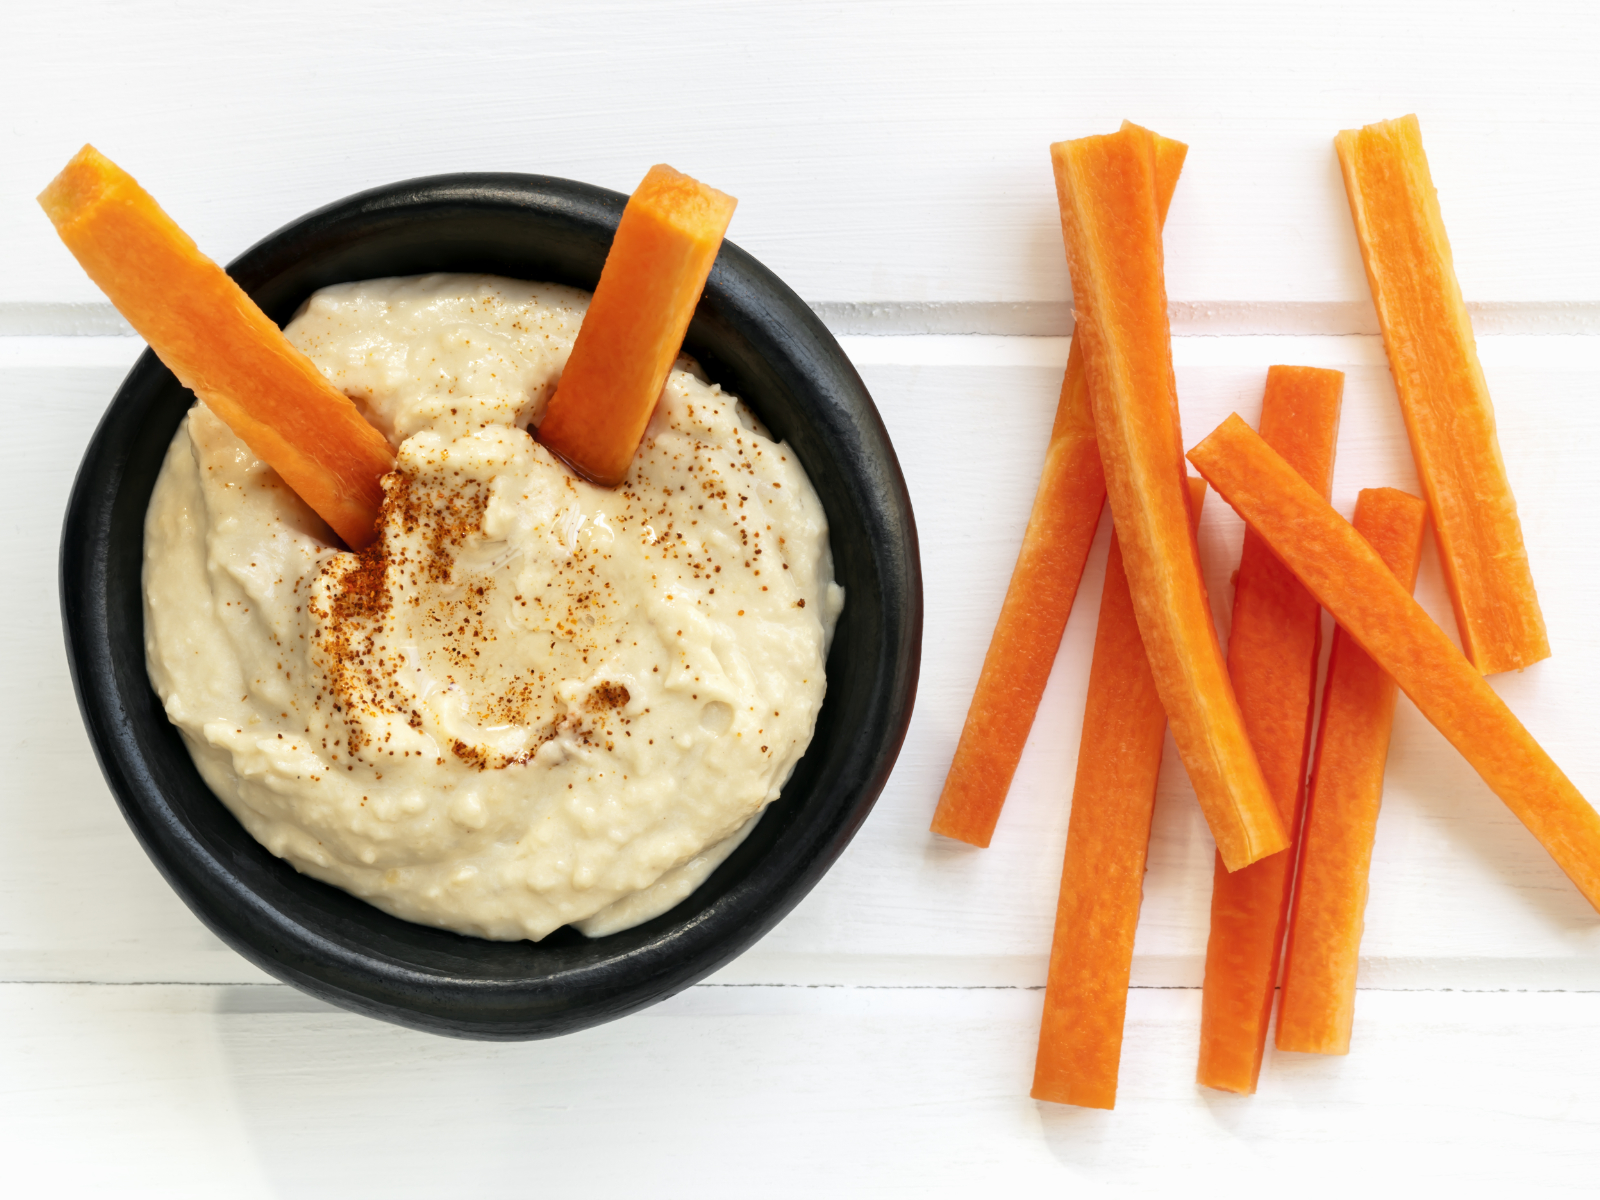 carrots and hummus for a snack